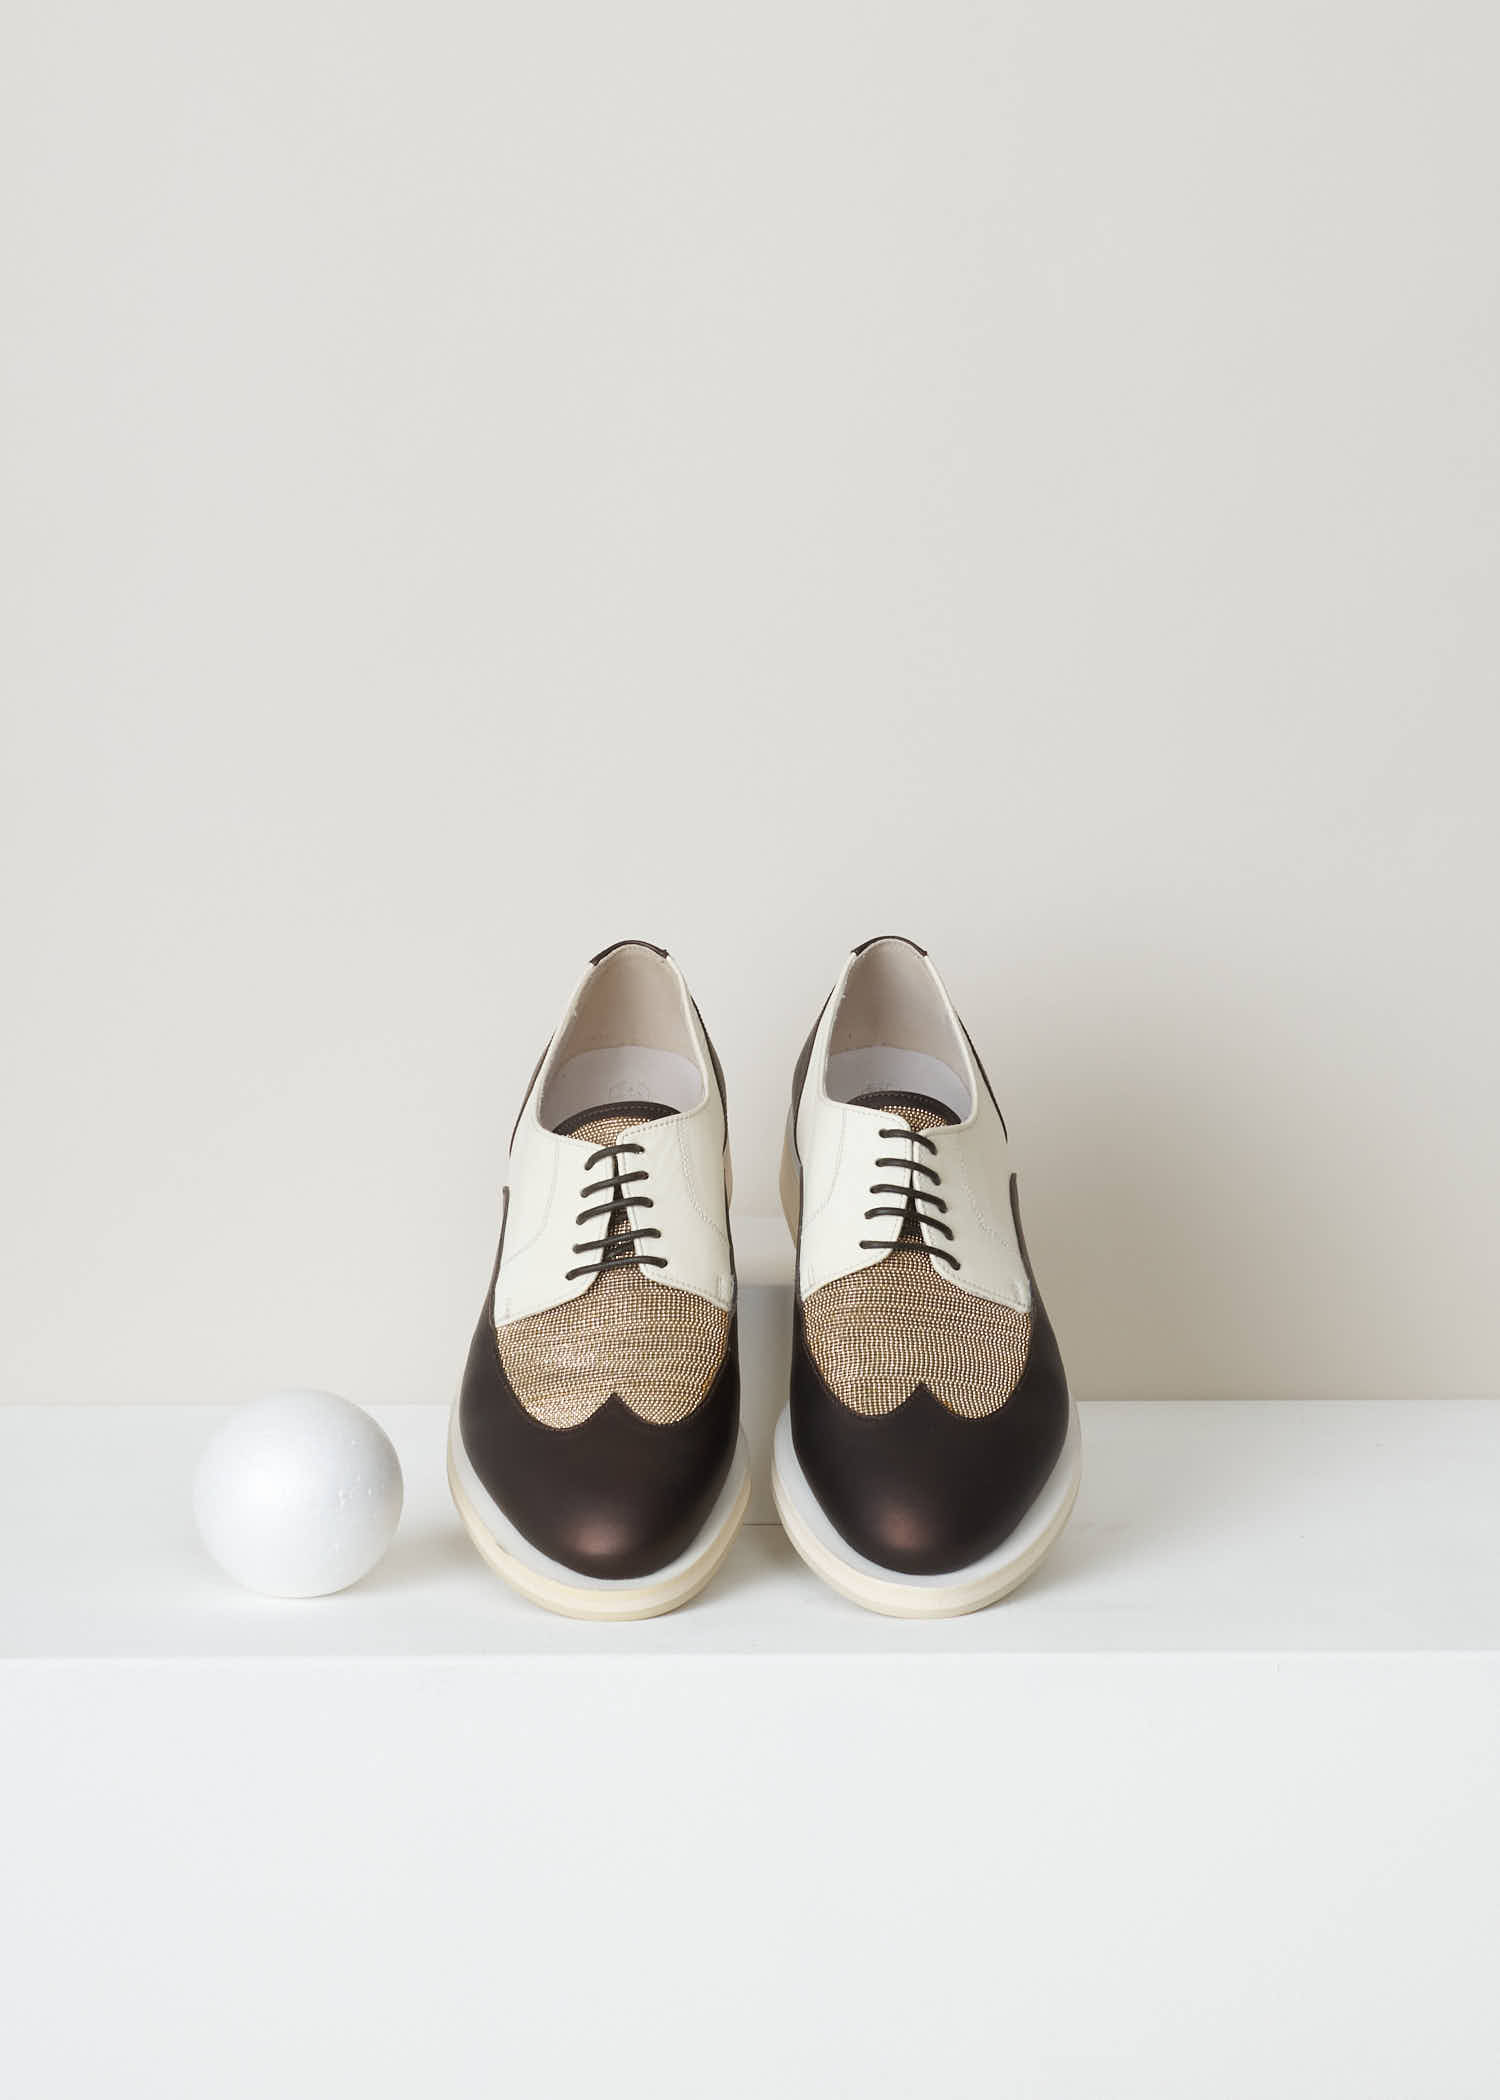 Brunello Cucinelli Leather lace-up shoes MZDRDG402_CC958 brown top. White and metallic brown leather derby shoe, with ultra-lightweight rubber sole and gold decorative beading.